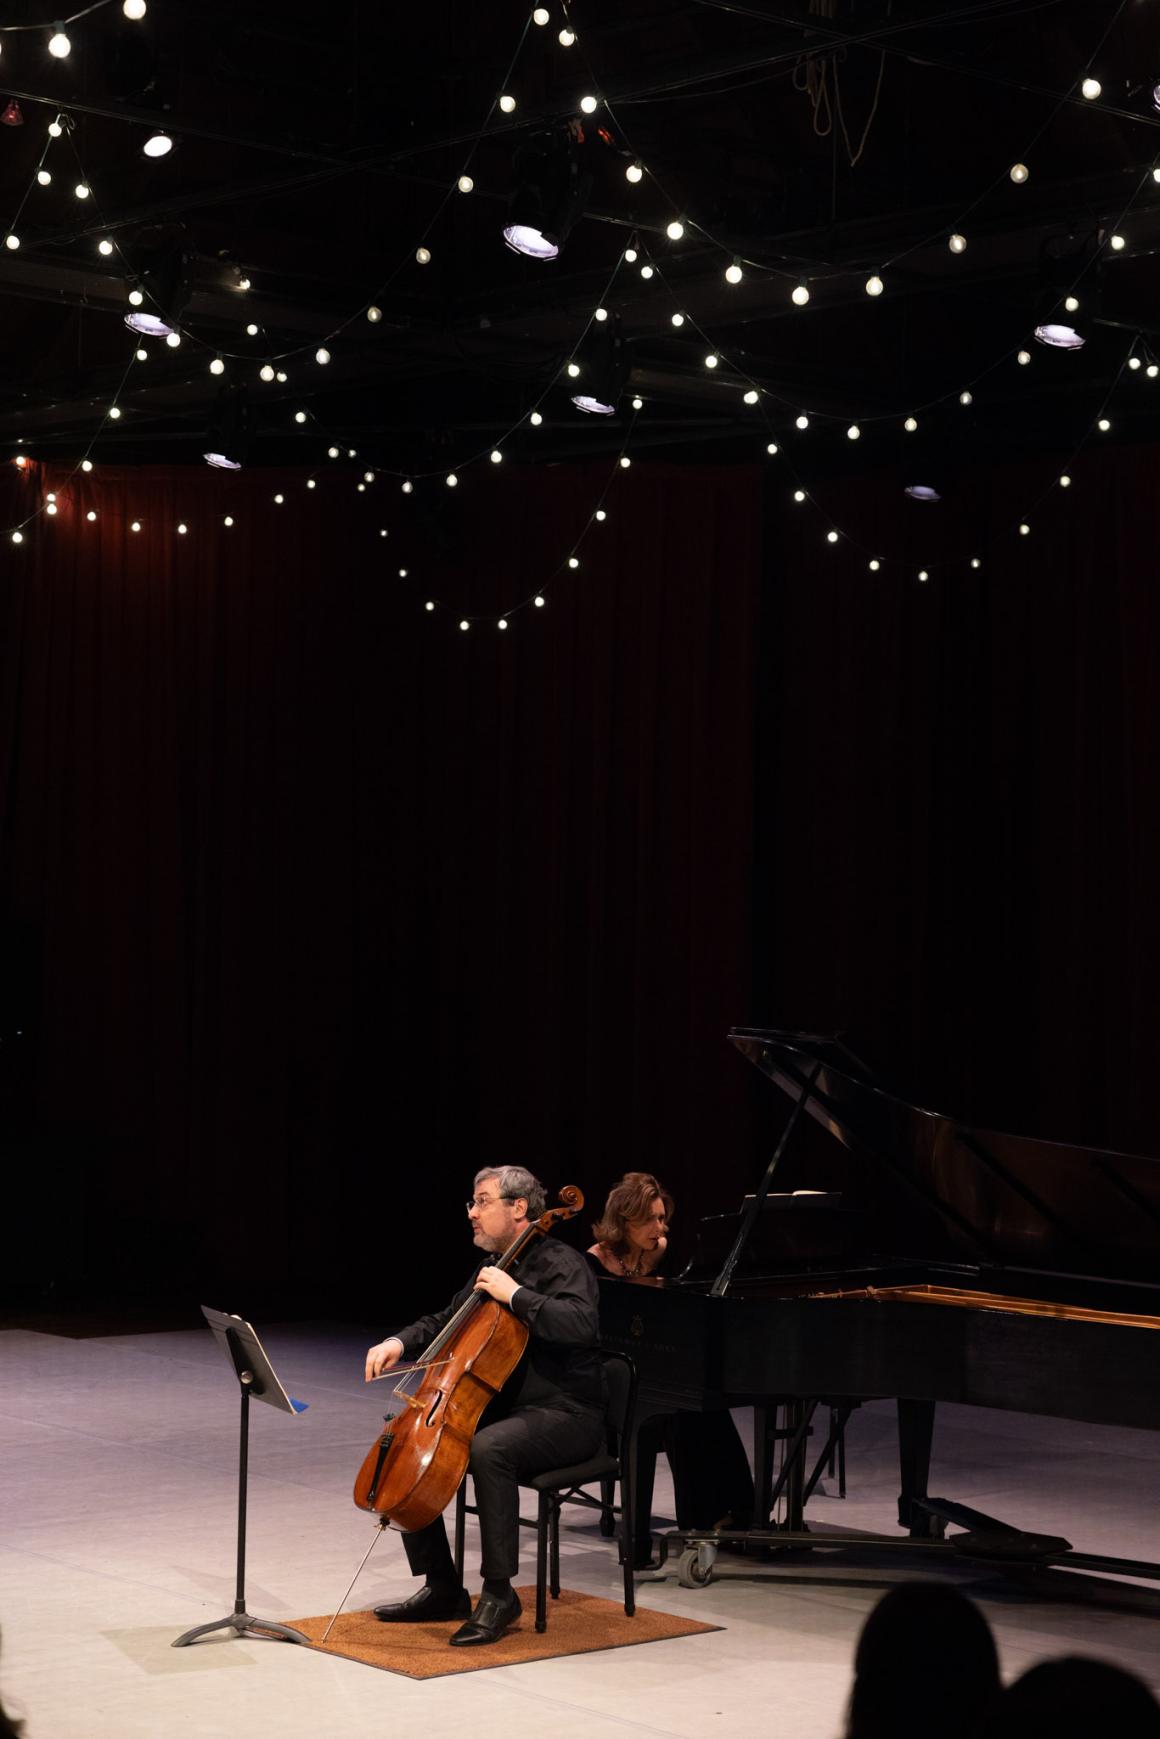 Professor Kouzov performing with pianist Yulia Fedoseeva on stage at Hidden Valley.